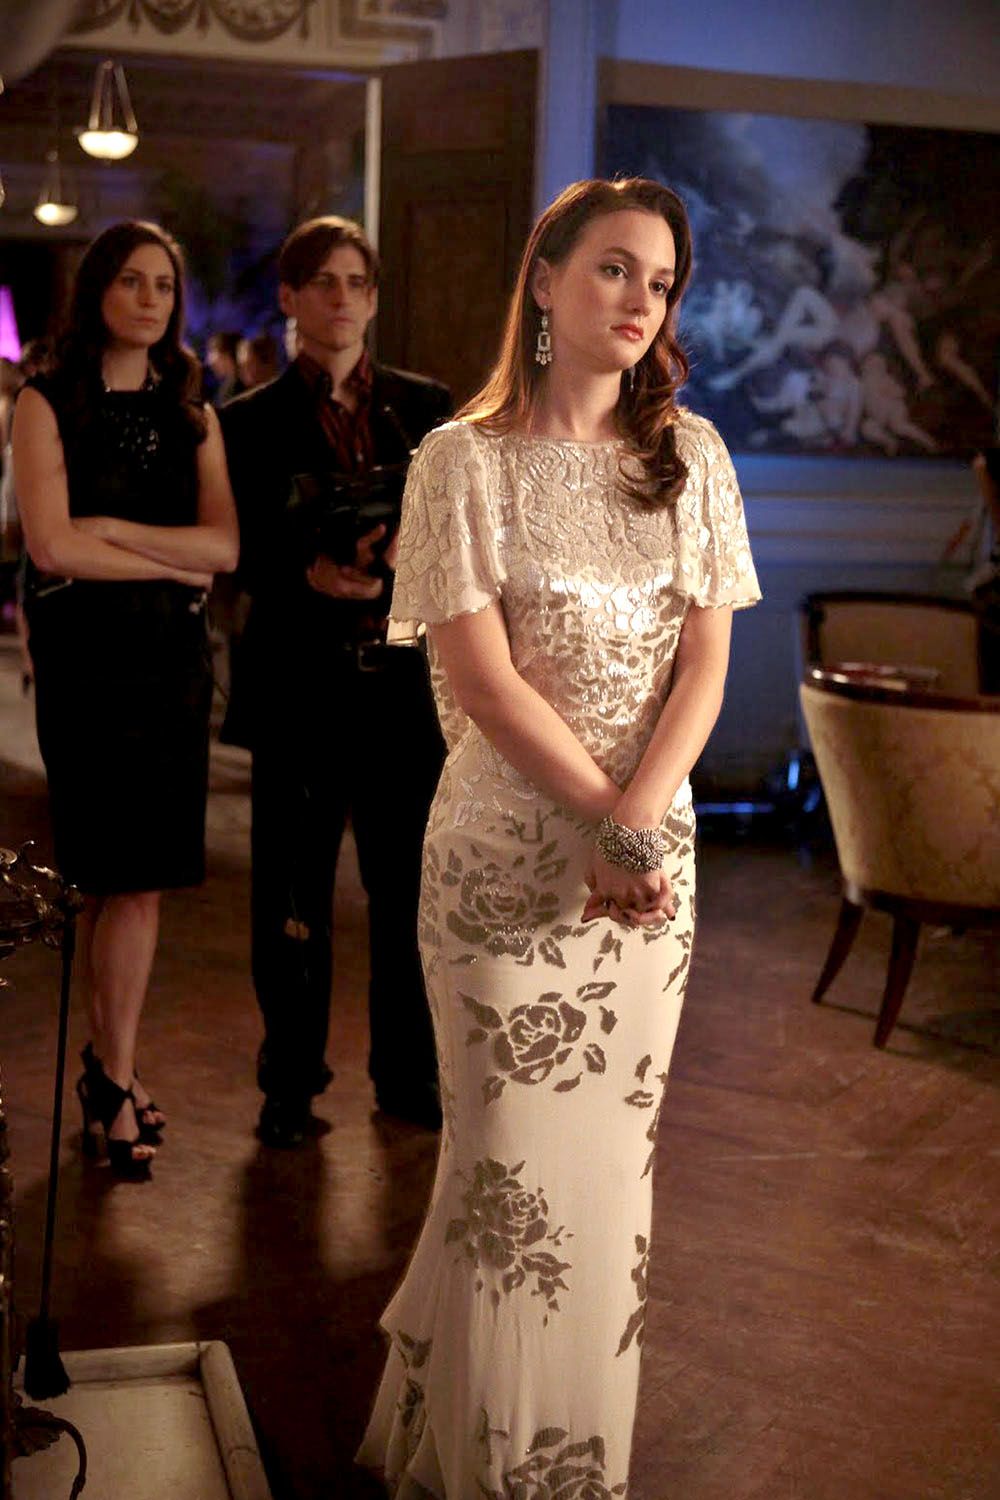 Blair Waldorf's Evening-Date Style: A Black Gown and Full-Length Gloves | 9  Style Lessons I Learned From the Queen of the Upper East Side — Gossip  Girl's Blair Waldorf | POPSUGAR Fashion